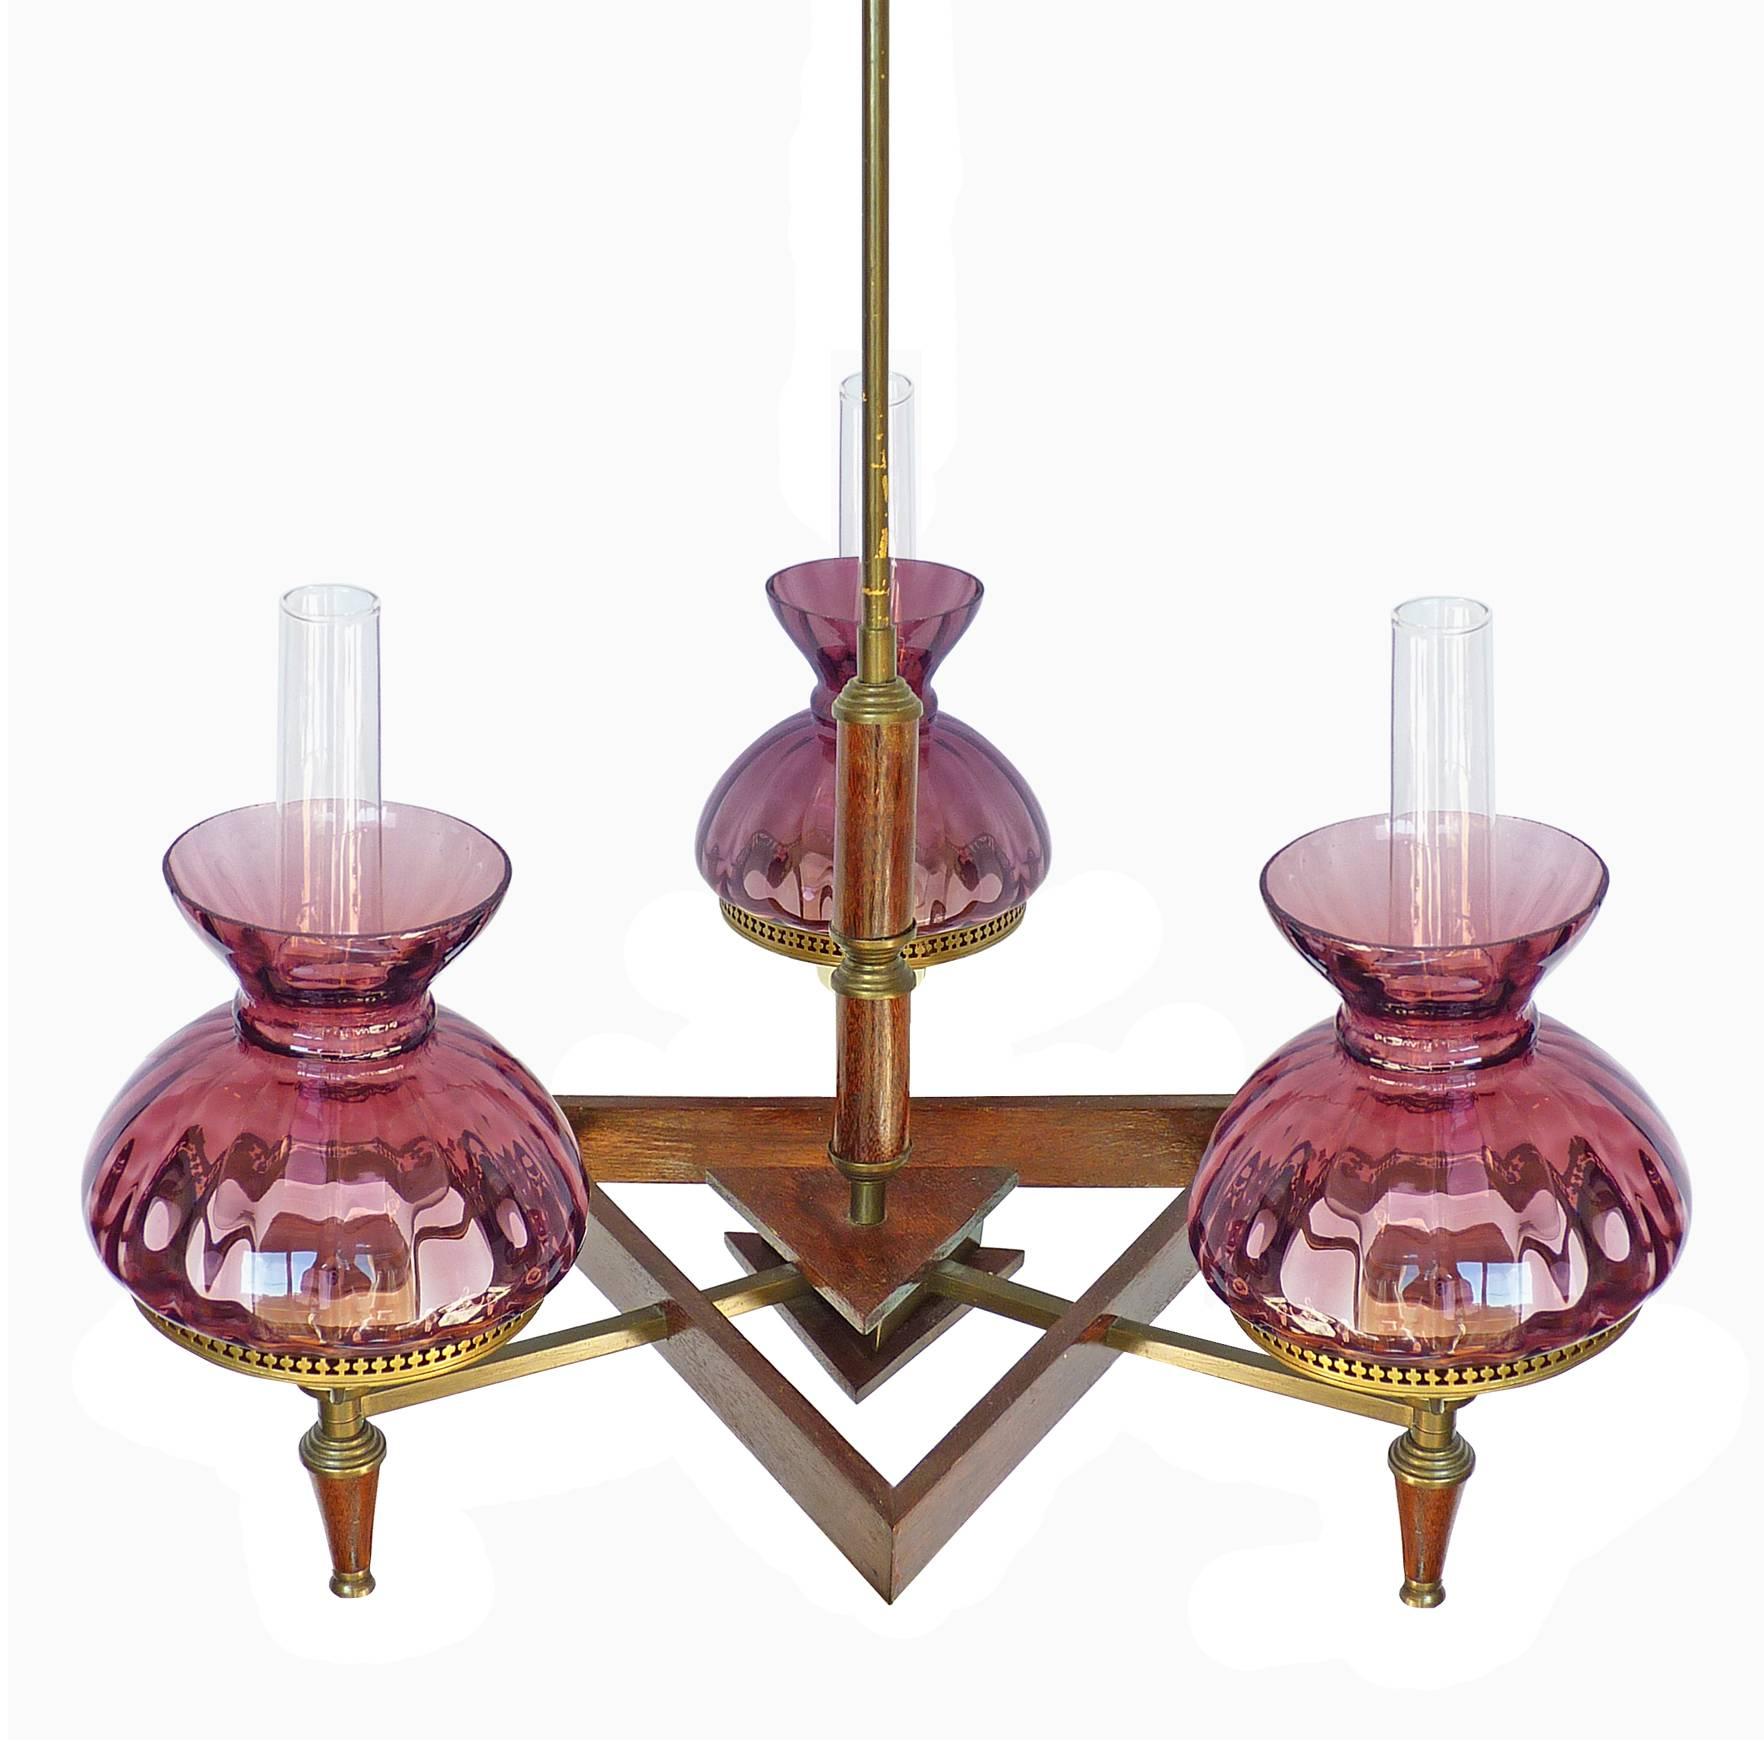 Antique French Art Deco purple amethyst glass shades / wood and brass / three-light chandelier.
Assembly required. Bulbs not included